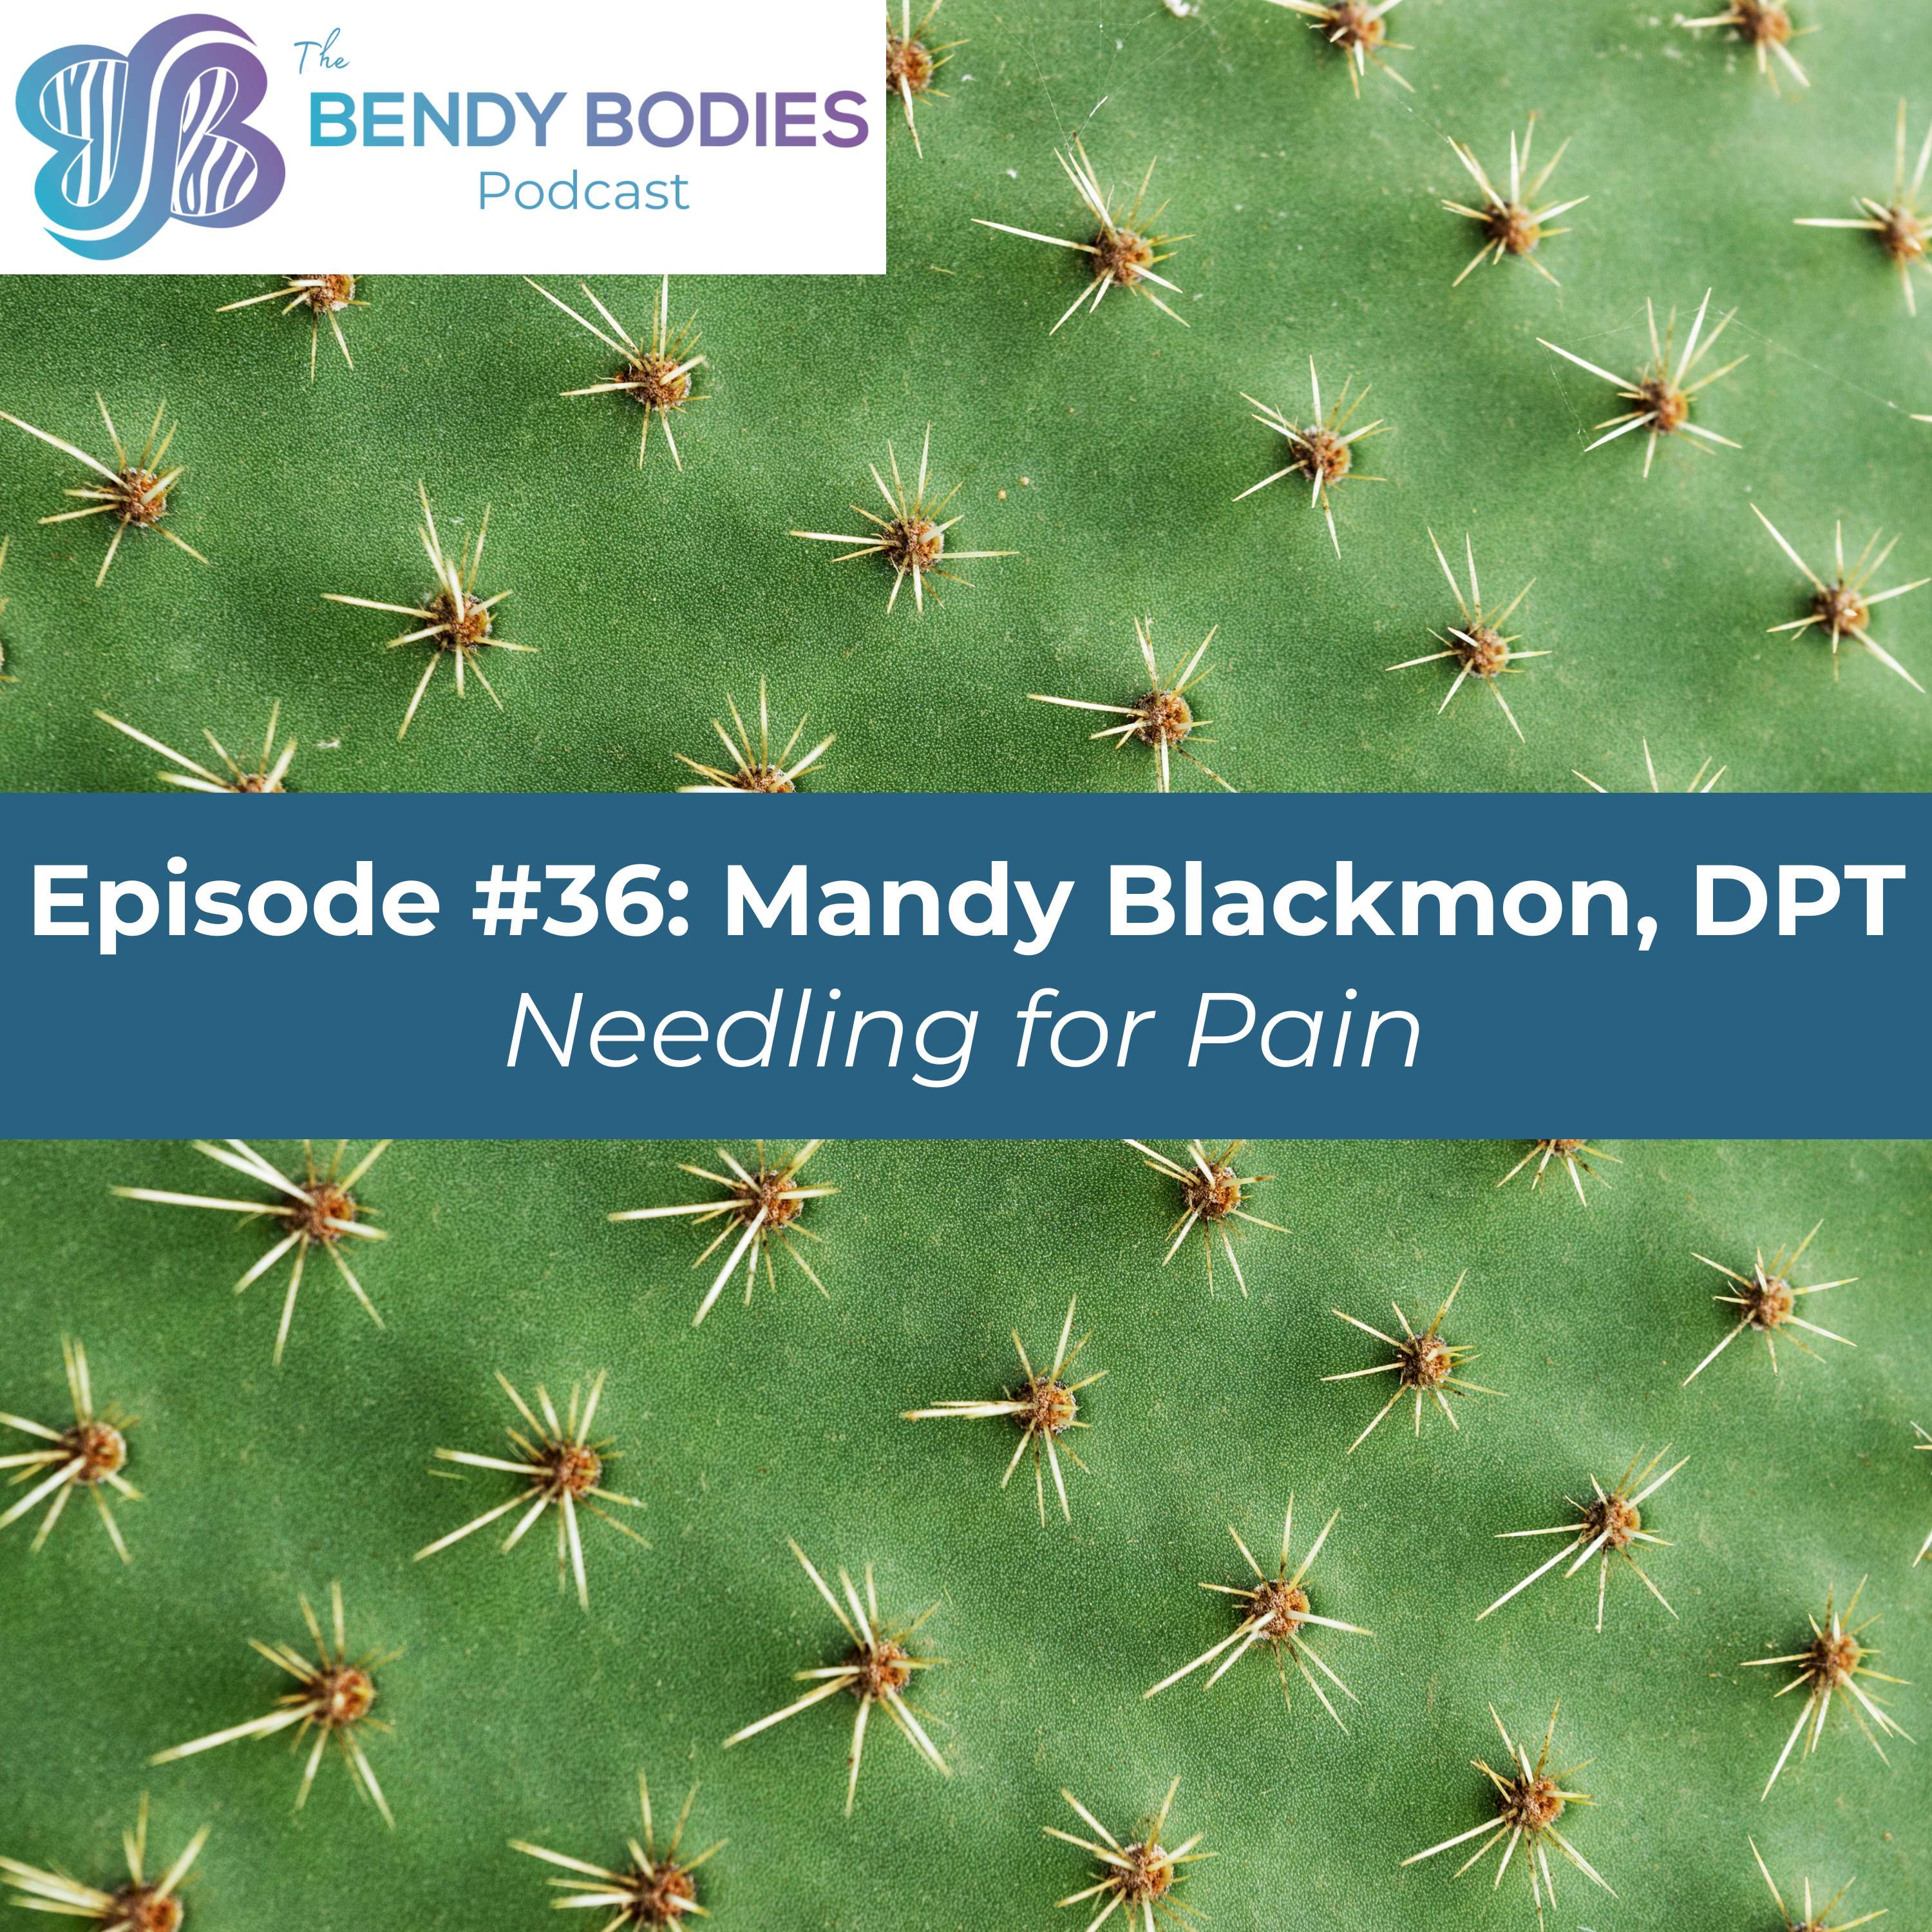 36. Needling for Pain with Mandy Blackmon, DPT